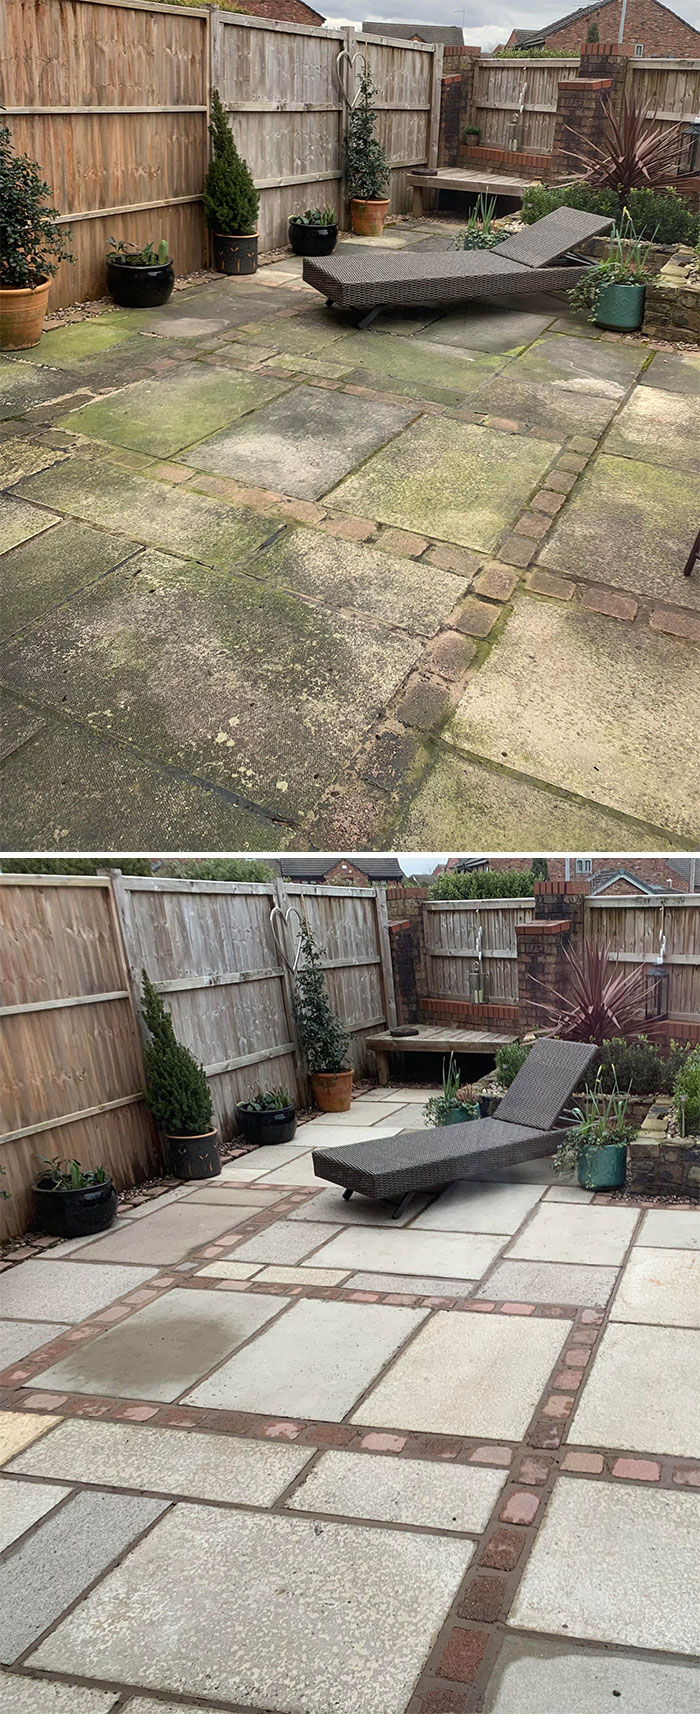 £40 Power Washer Did A Great Job